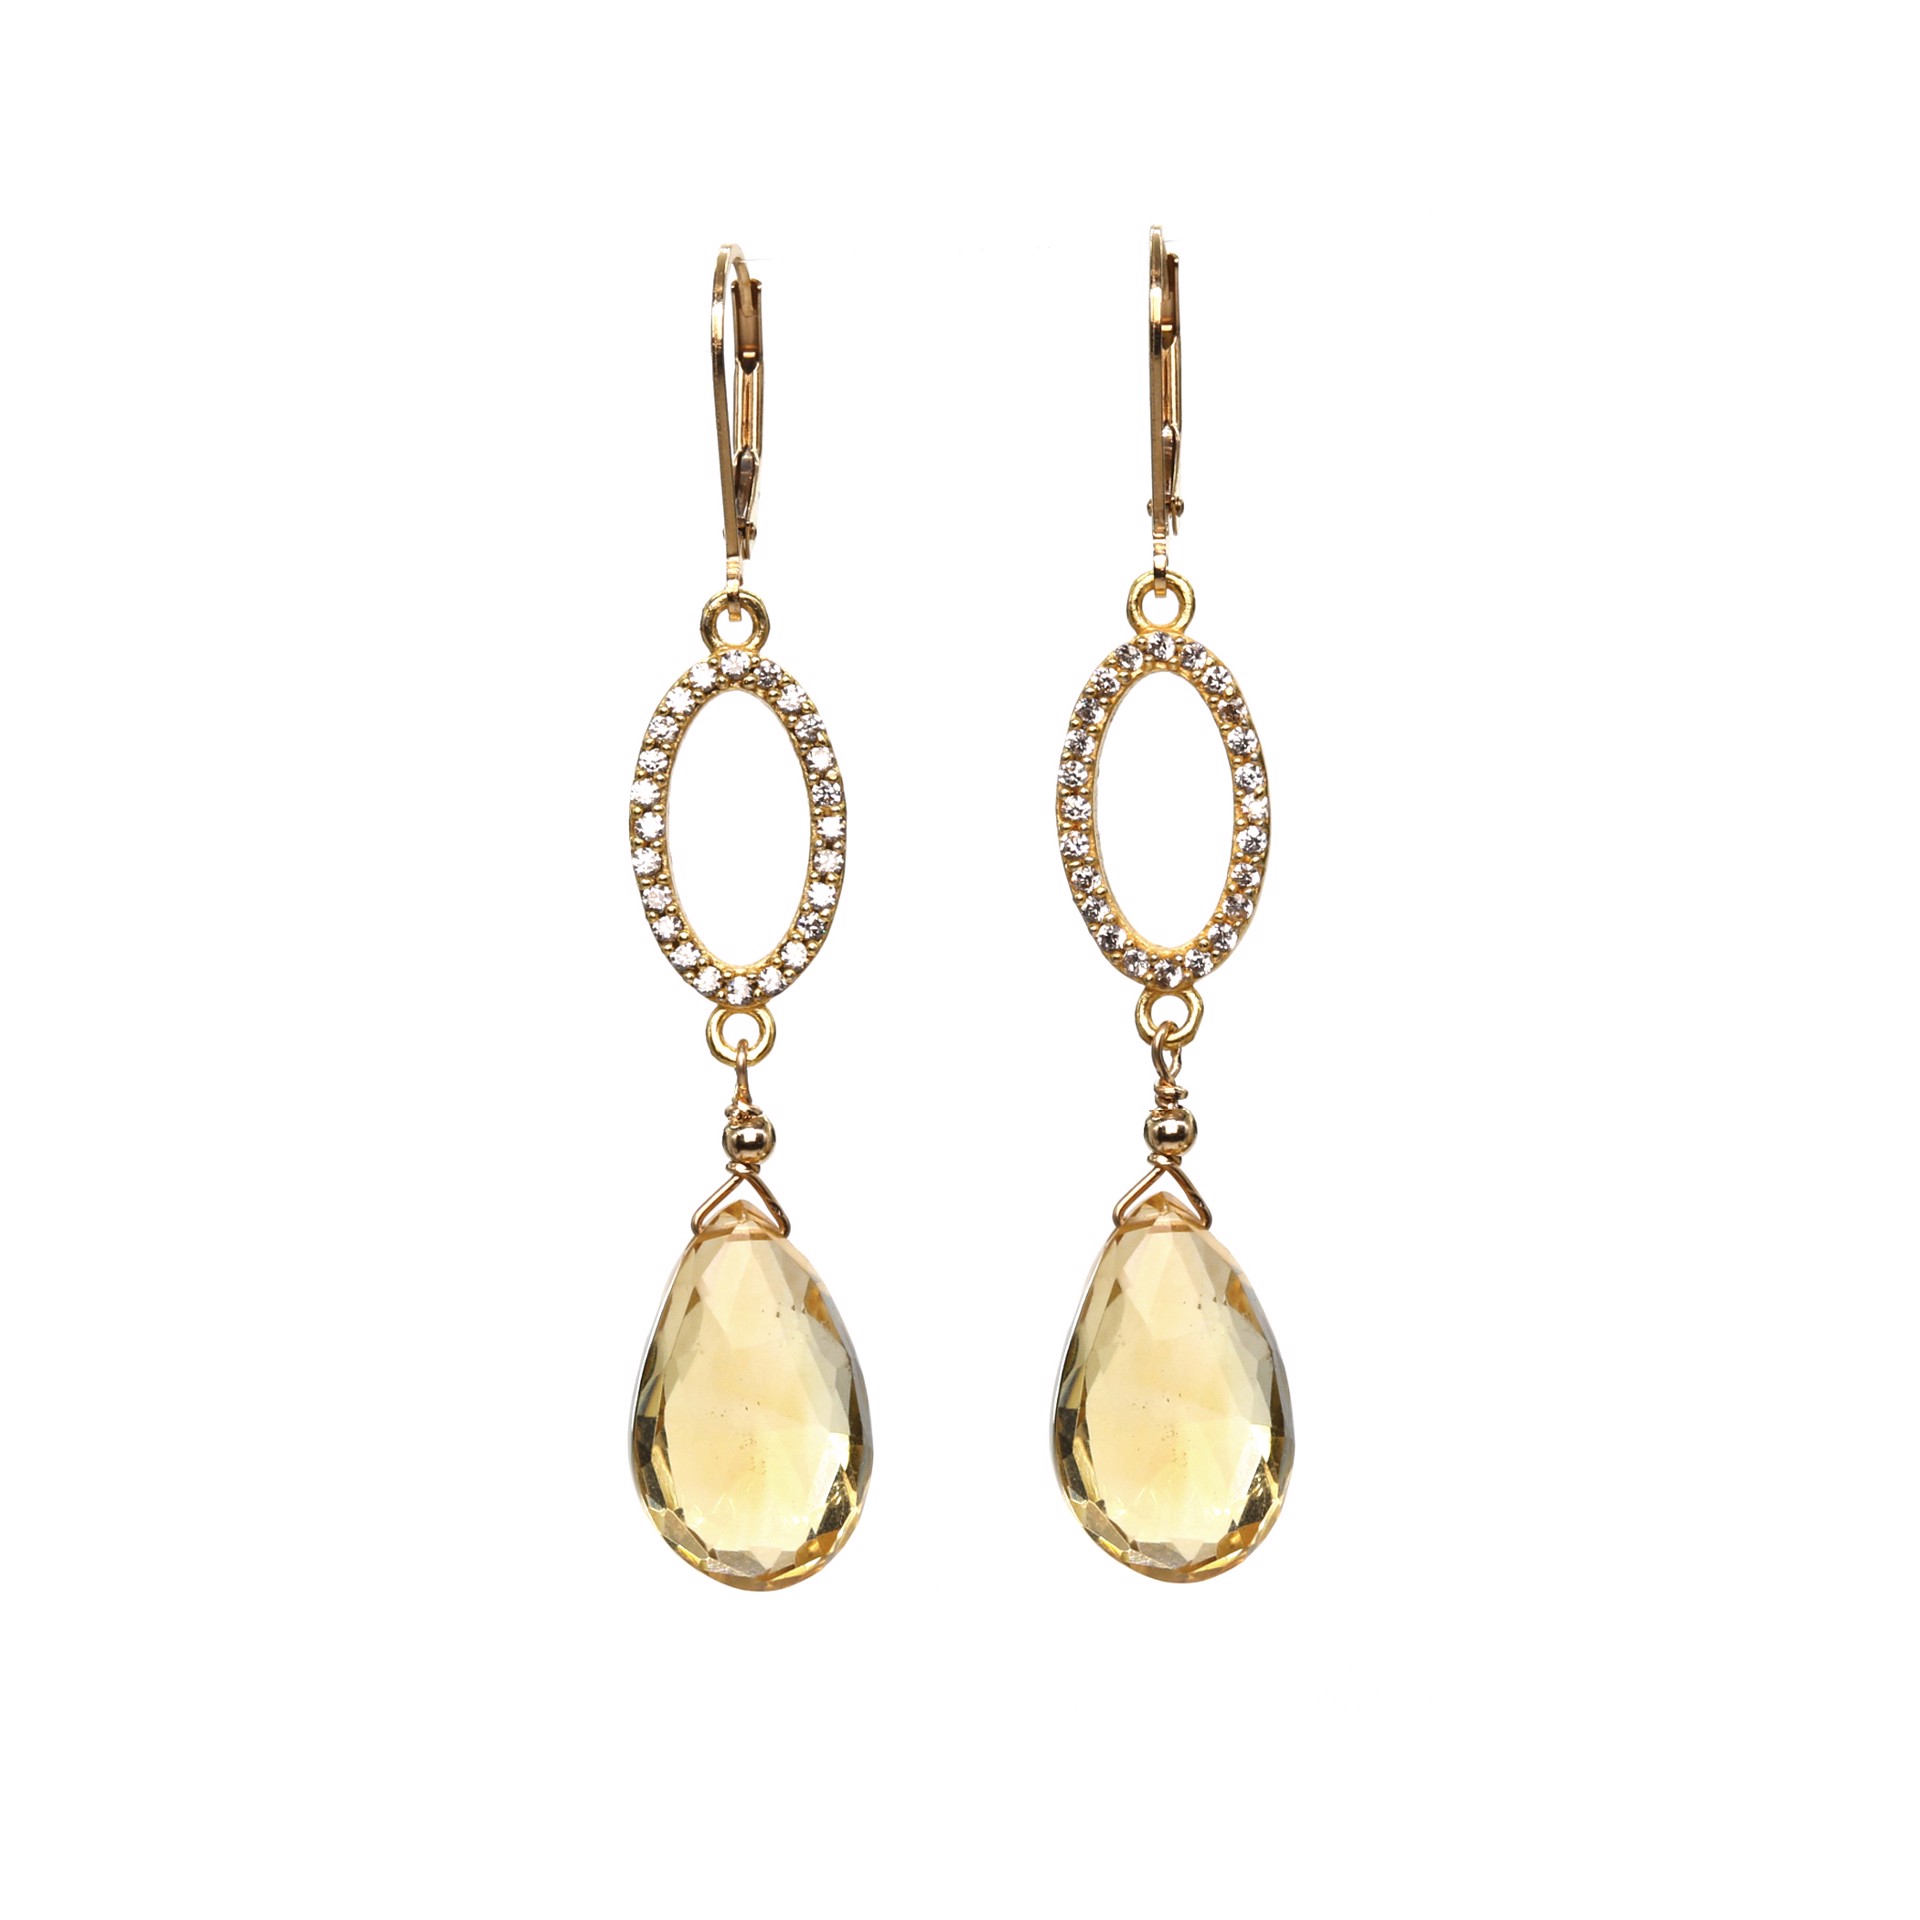 MLJ-3364-E- Faceted Citrine Briolettes on ovals In 14K Gold-filled and Gold vermeil by Melinda Lawton Jewelry